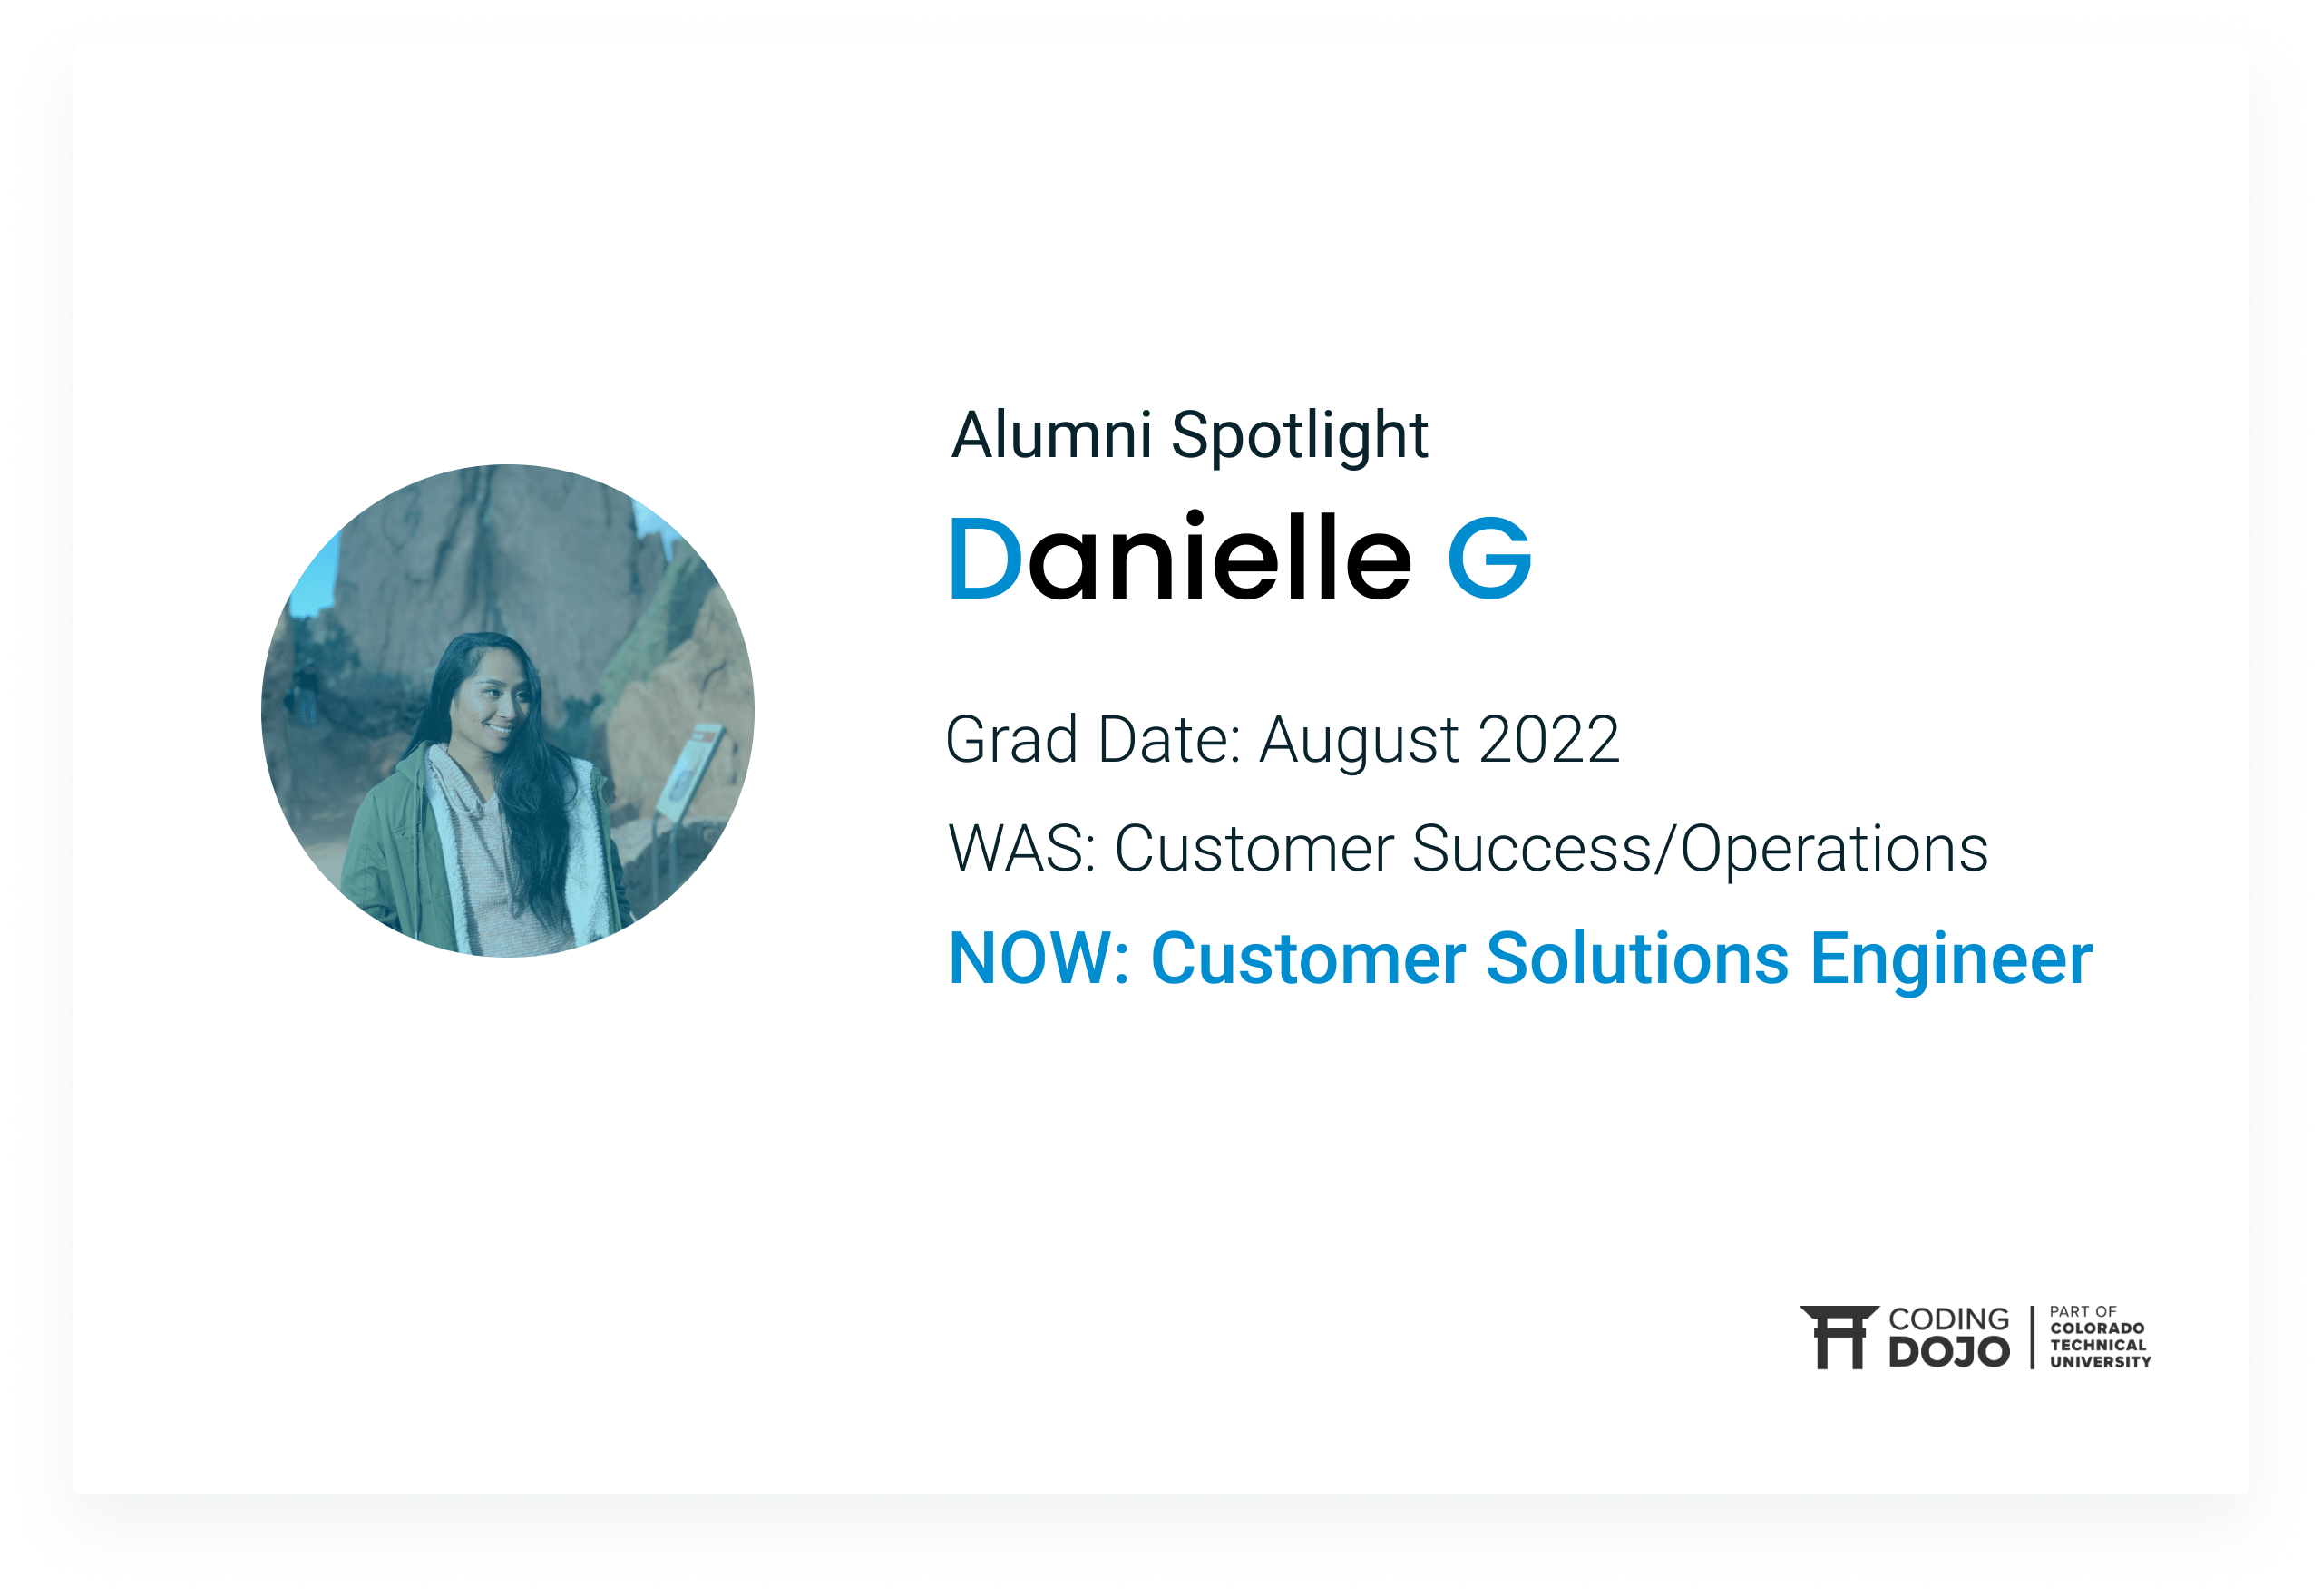 From Customer Success to Customer Solutions Engineer | How Alumni Danielle G Advanced Her Career Path